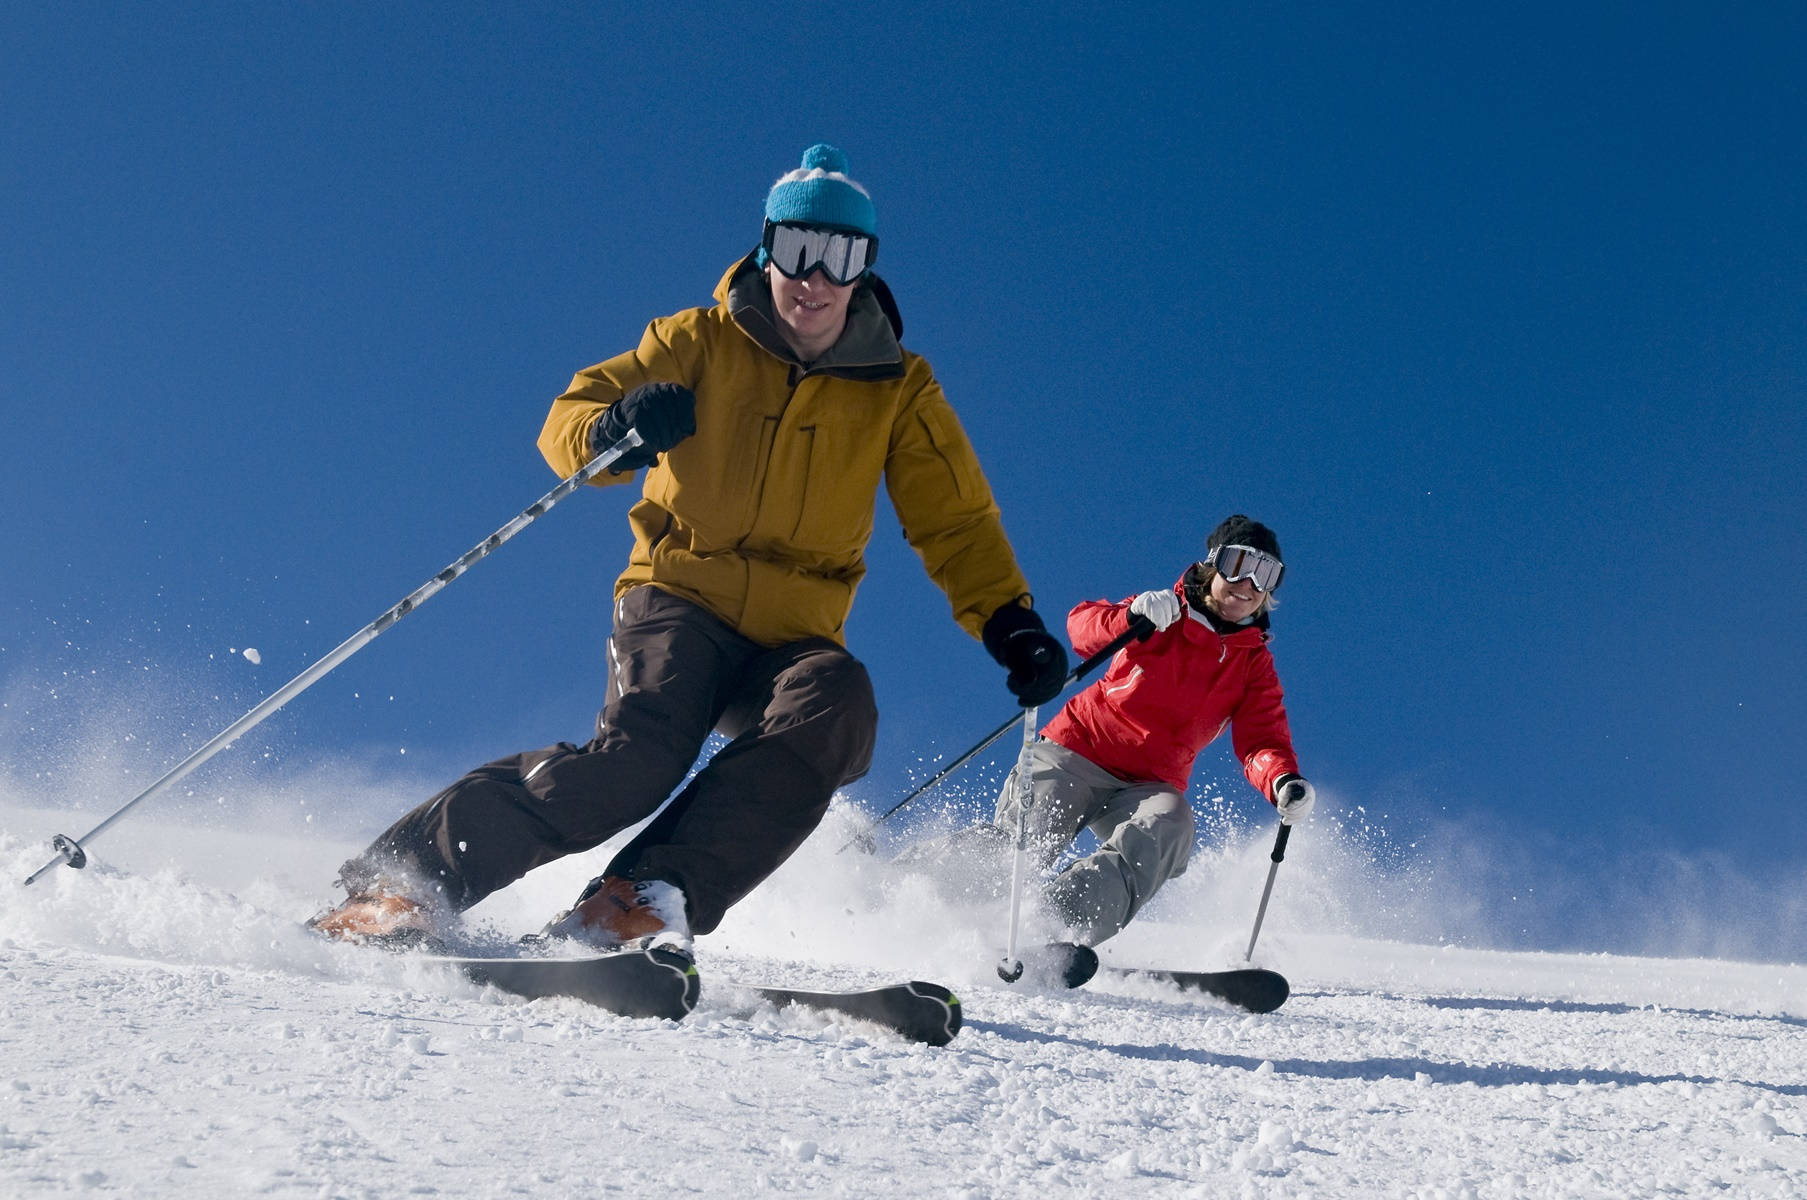 Alpine Skiing With Friends Wallpaper